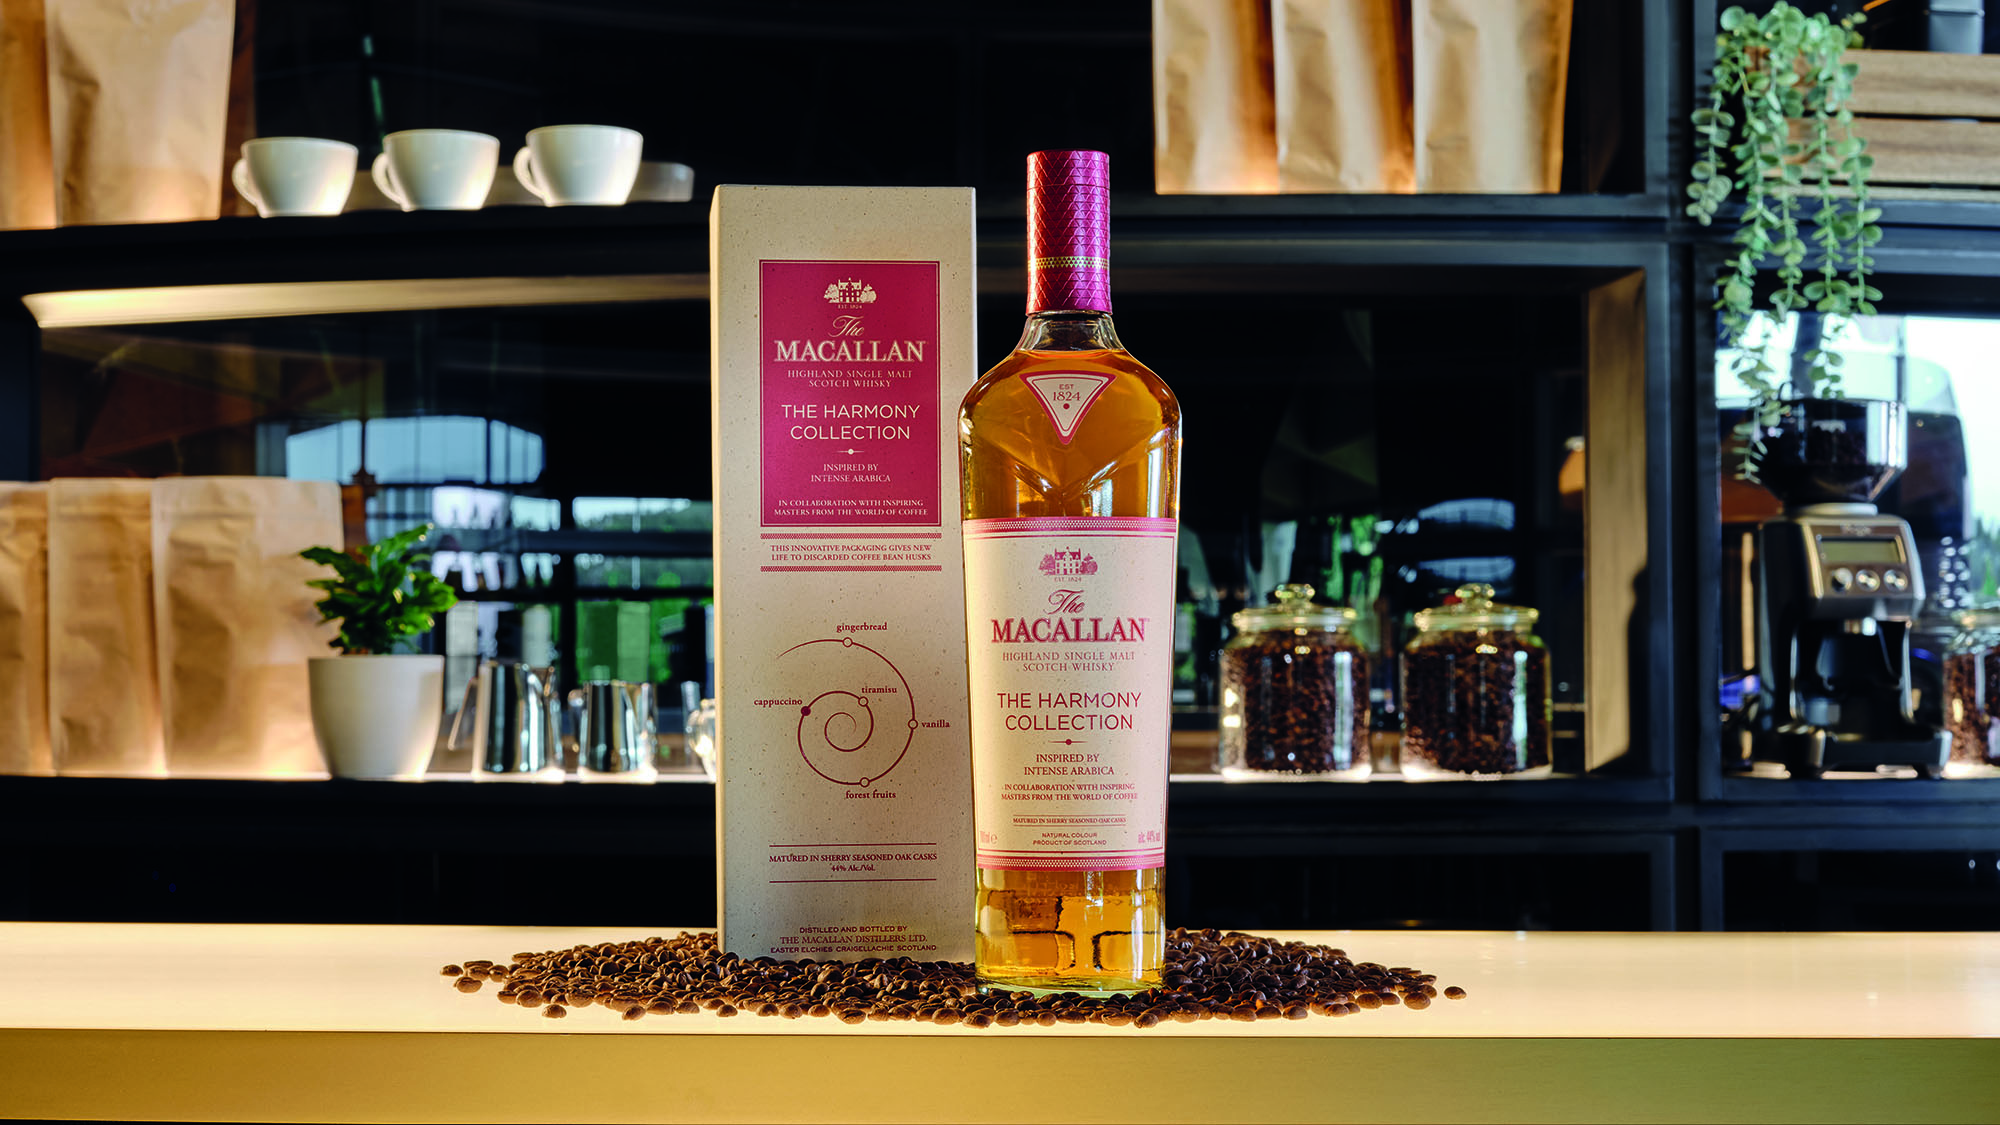 The Macallan Harmony Collection Inspired by Intense Arabica